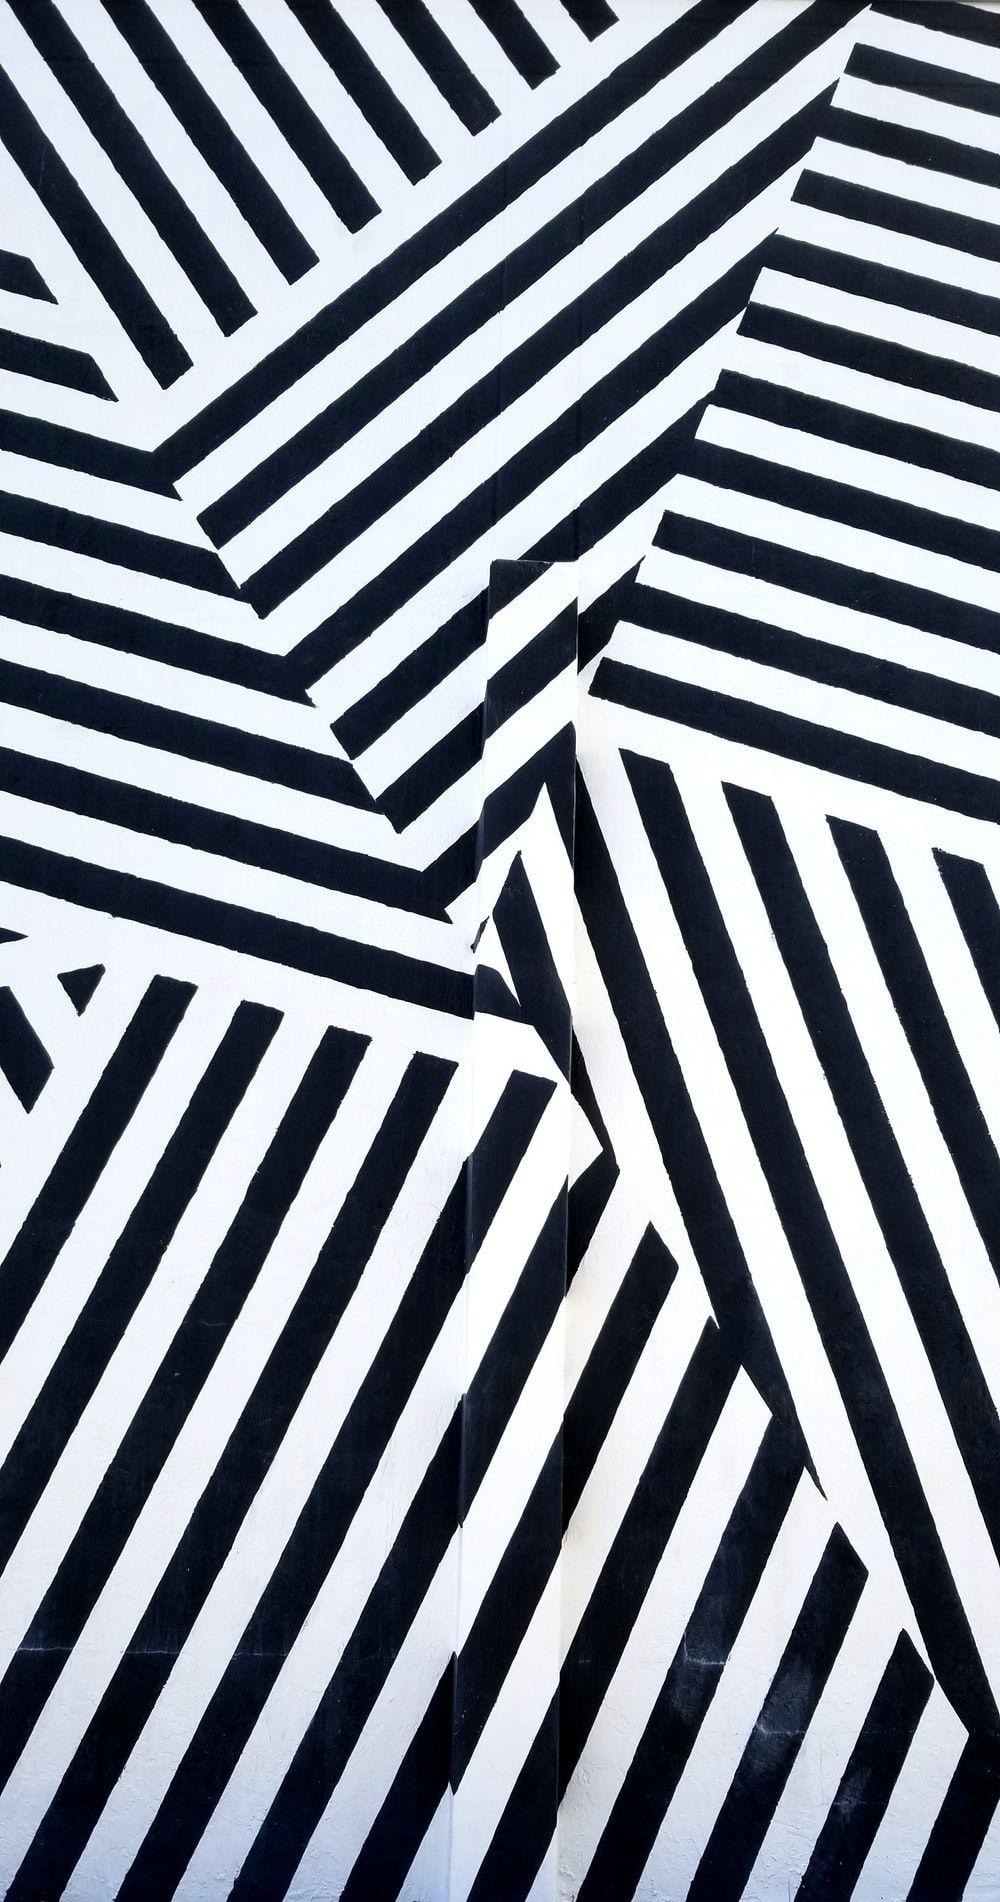 VI COLLECTIONS Black  White Lines Wallpaper 200 cms by 45 cms  Amazonin  Home Improvement